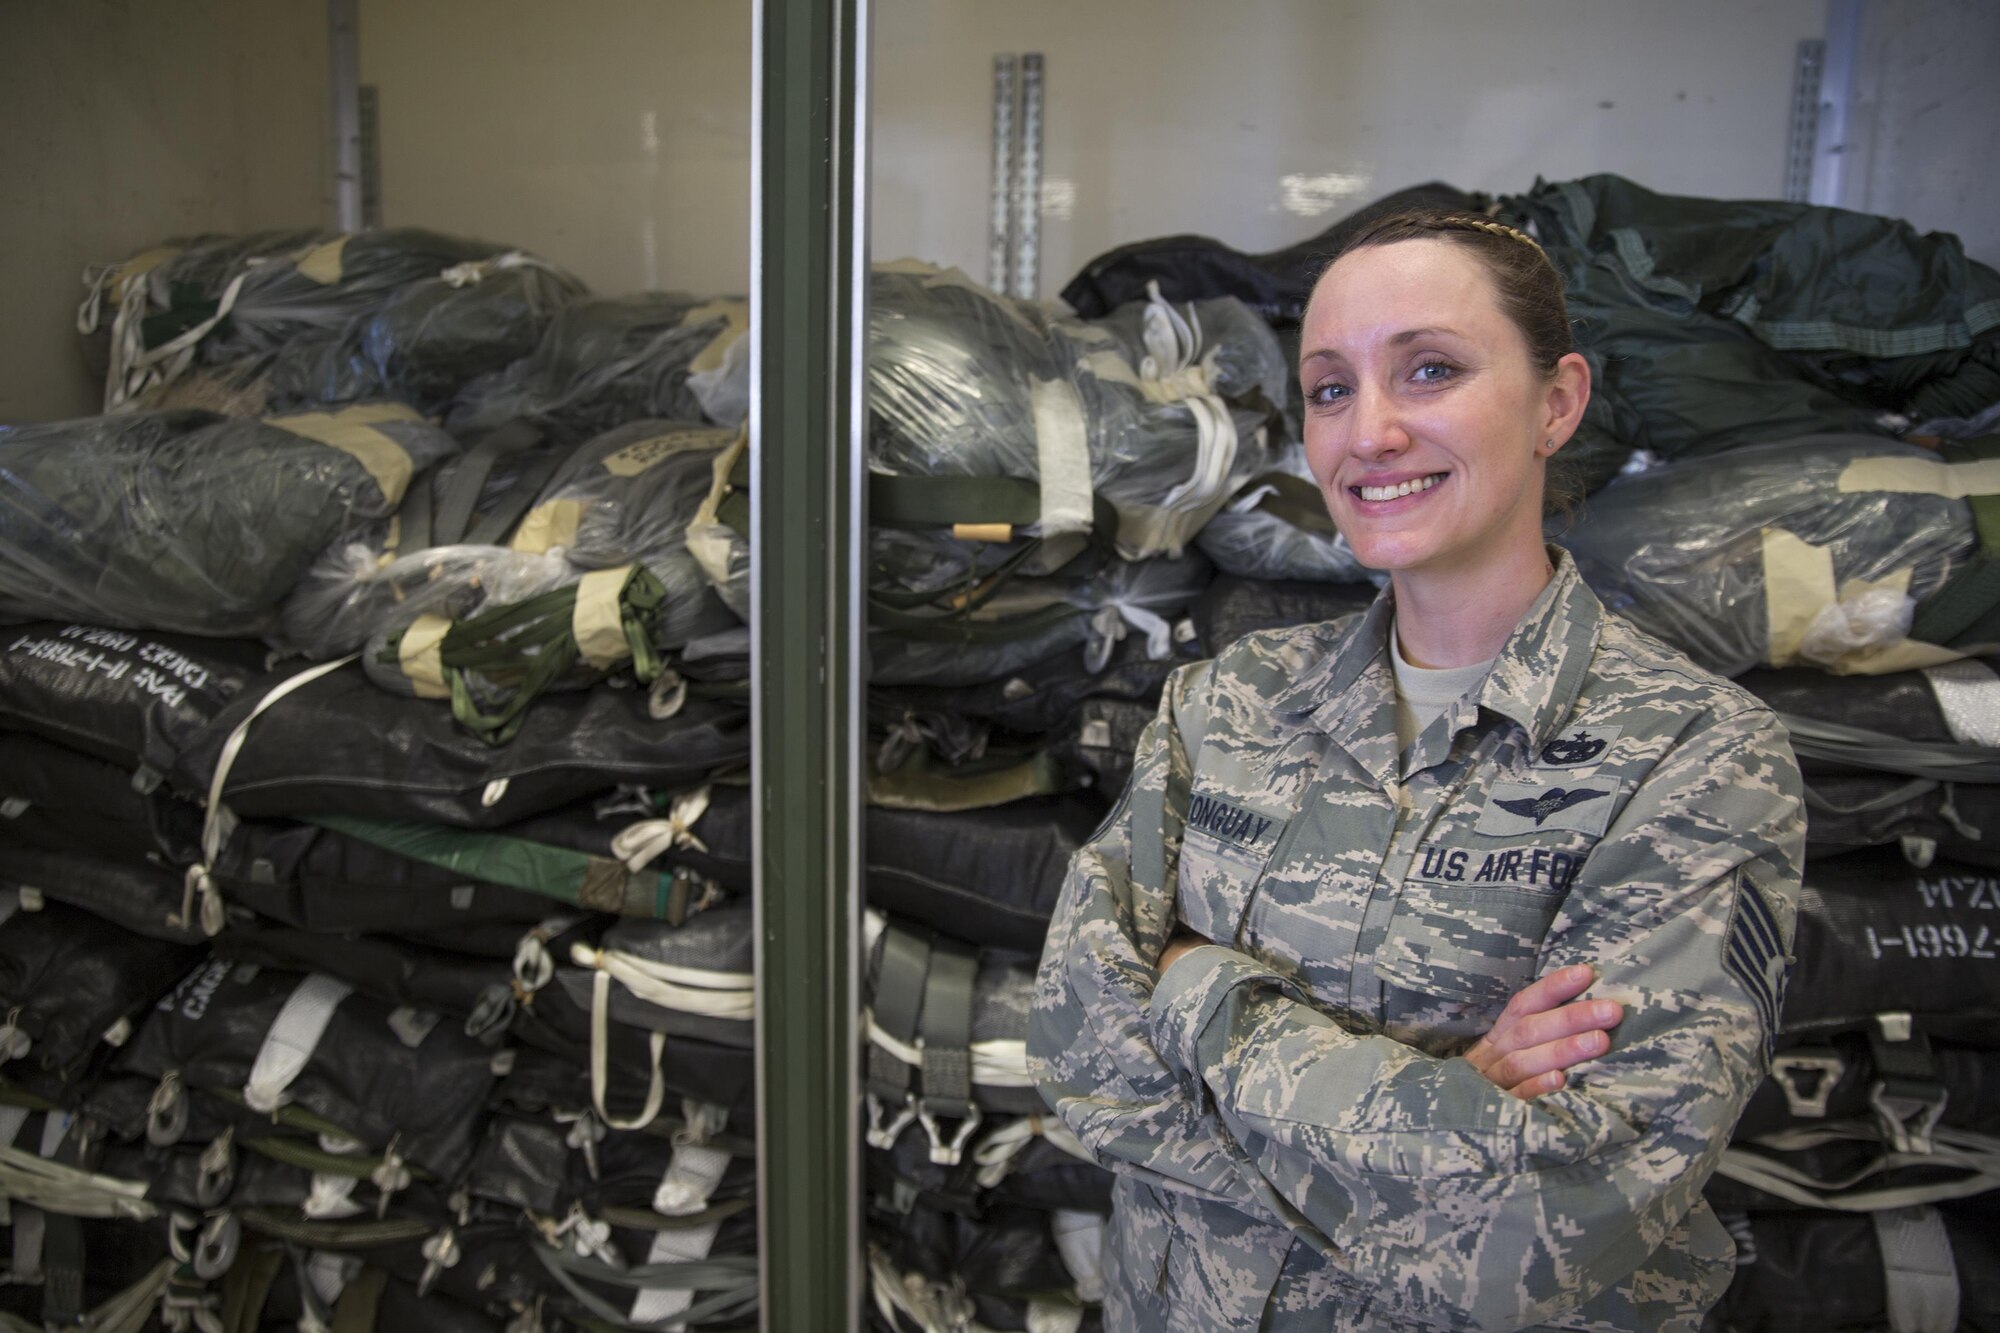 Tech. Sgt. Chasity Castonguay, 374th Logistics Readiness Squadron rigger operations supervisor, shows over 100 parachutes ready to use for low-cost low altitude airdrops during Operation Christmas Drop at Andersen Air Force Base, Dec. 5, 2015. The T-10 and T-10R parachutes were donated by the U.S. Army; utilizing repurposed, expired personnel chutes for cargo airdrop is just one way LCLA airdrops are cost-efficient and easy to apply across the global airlift community. The 40,000 pounds of donated items are packed into bundles for C-130 aircrews from USAF, JASDF, and RAAF to perform LCLA airdrops on unsurveyed drop zones while providing critical supplies to 56 islands throughout the Commonwealth of the Northern Marianas, Federated States of Micronesia and Republic of Palau. (U.S. Air Force photo by Osakabe Yasuo/Released)